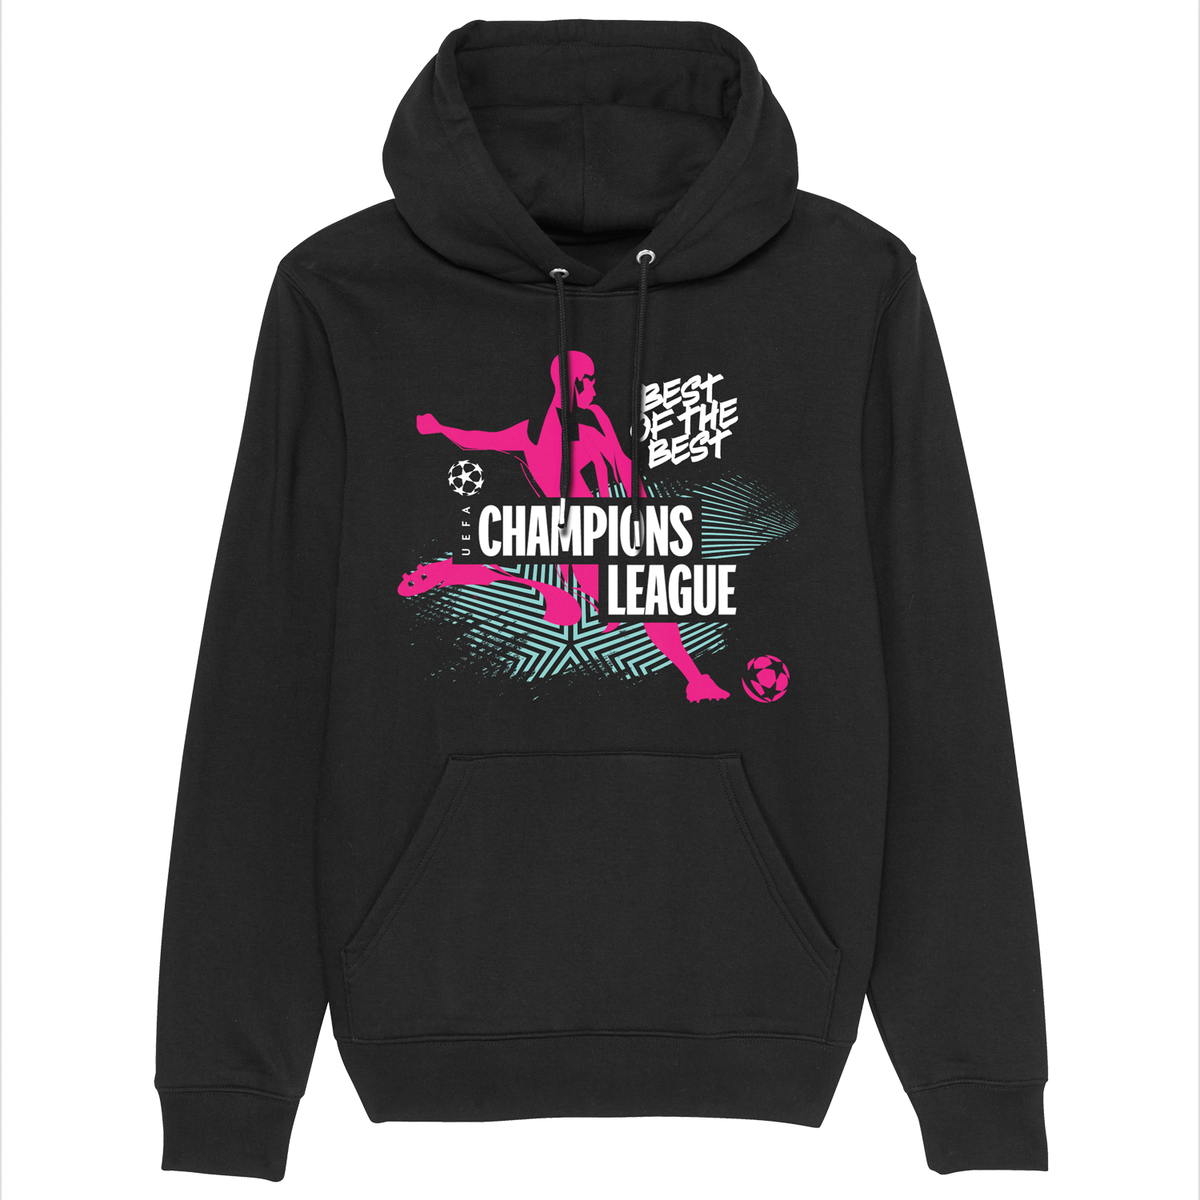 UEFA Champions League - Urban Best Of The Best Black Hoodie UEFA Club Competitions Online Store